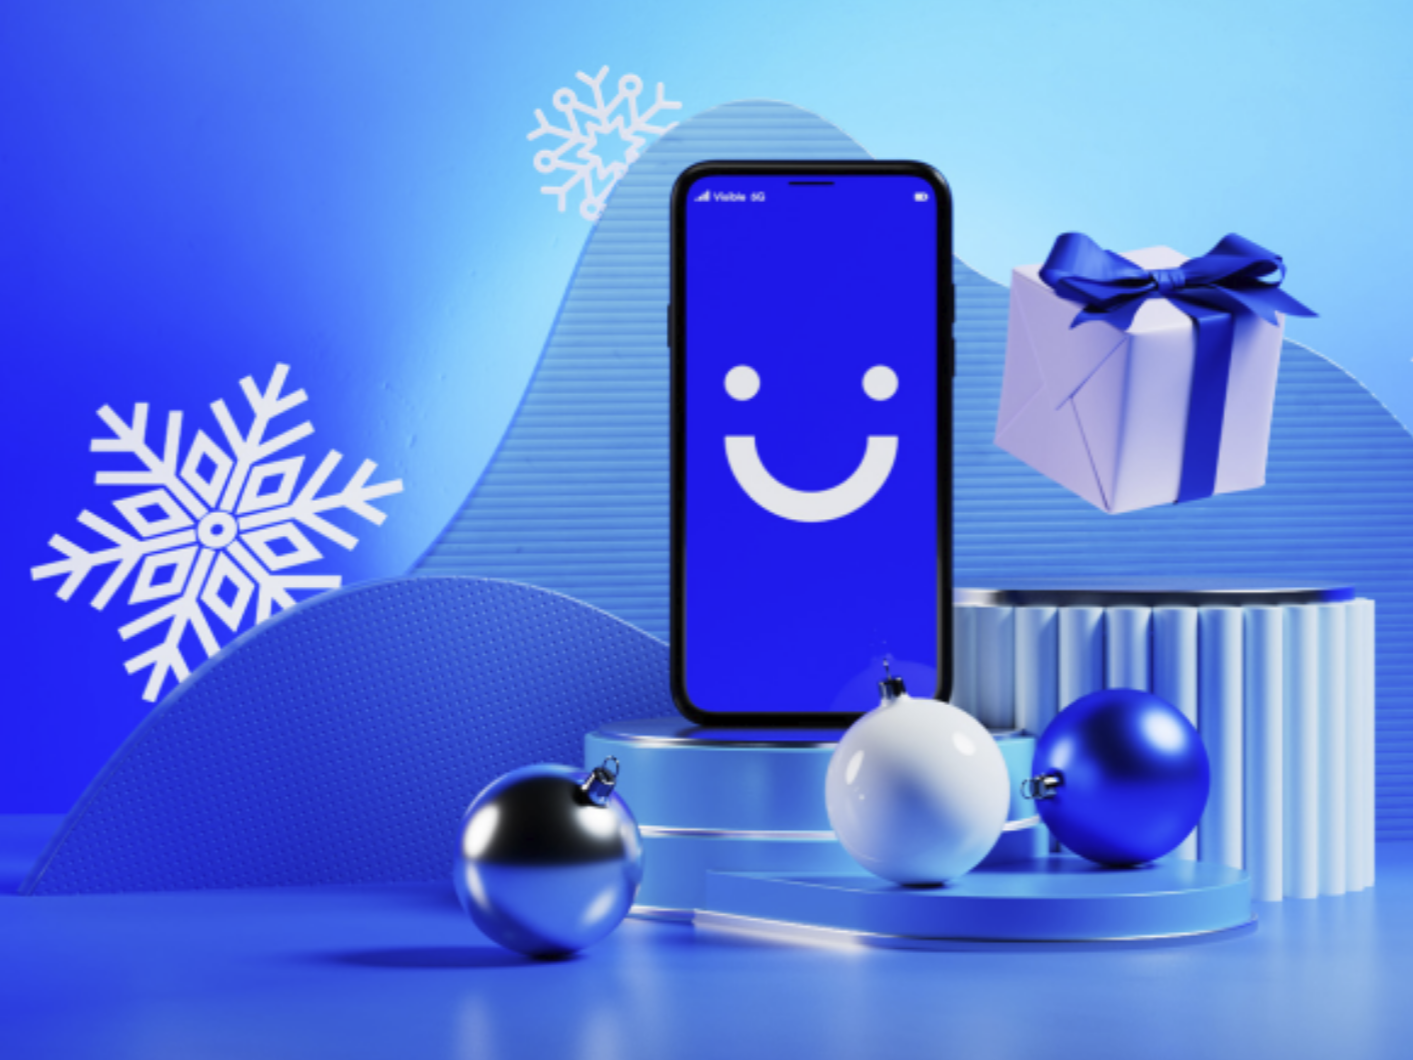 Visible wireless holiday deal feature with snow and more.